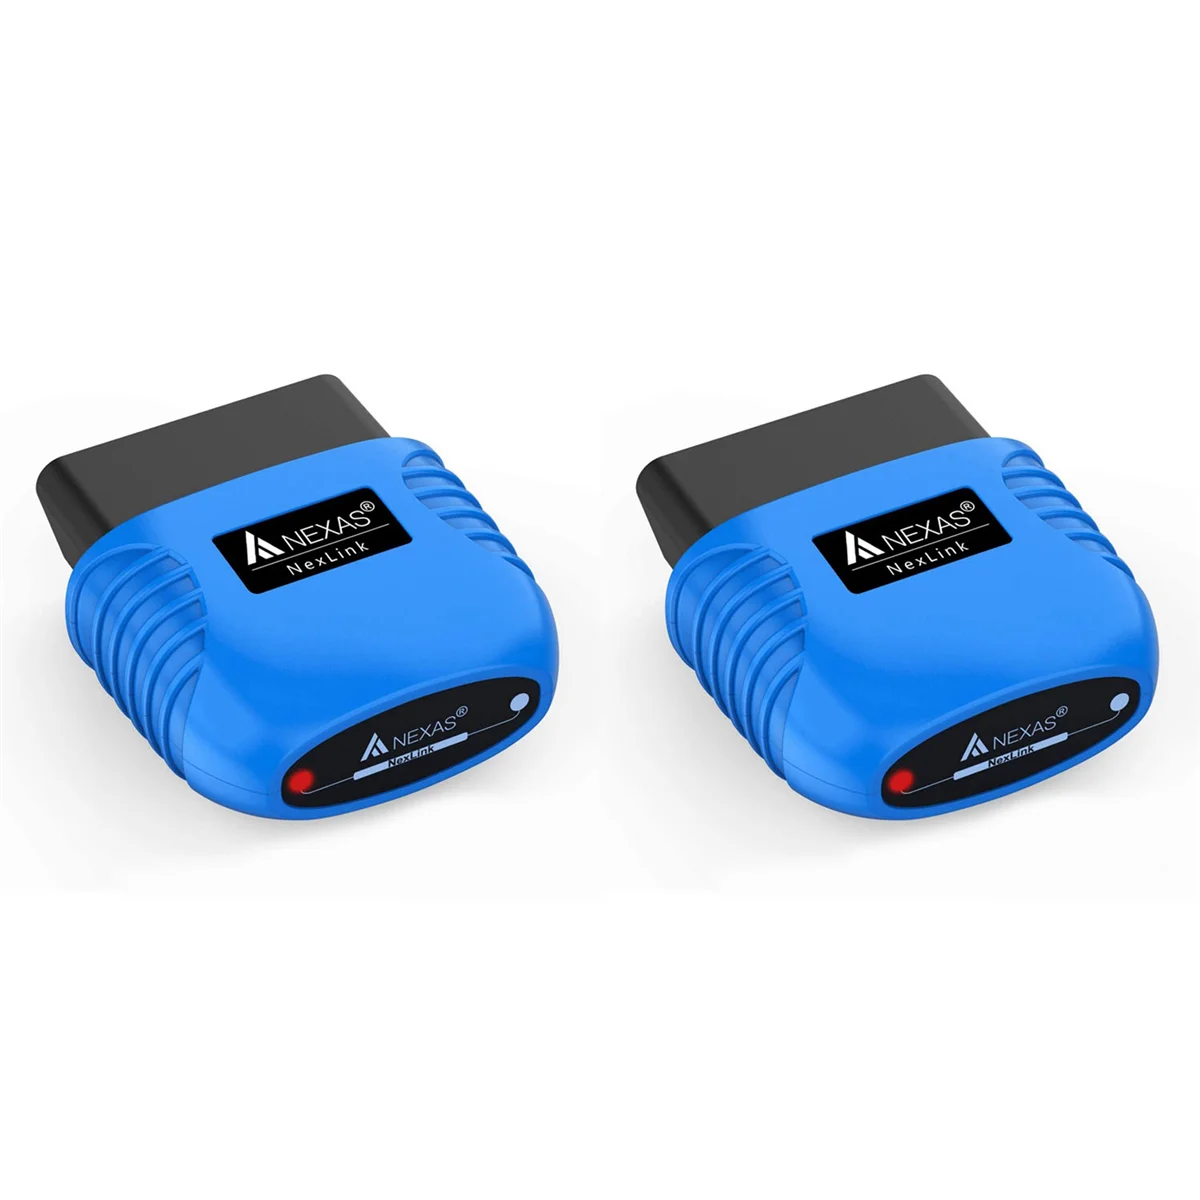 

2X NEXAS NexLink Bluetooth 5.0 Diagnostic Scanner for IOS &Android & PC OBD2/EOBD Fault Code Reader Diagnostic Scan Tool